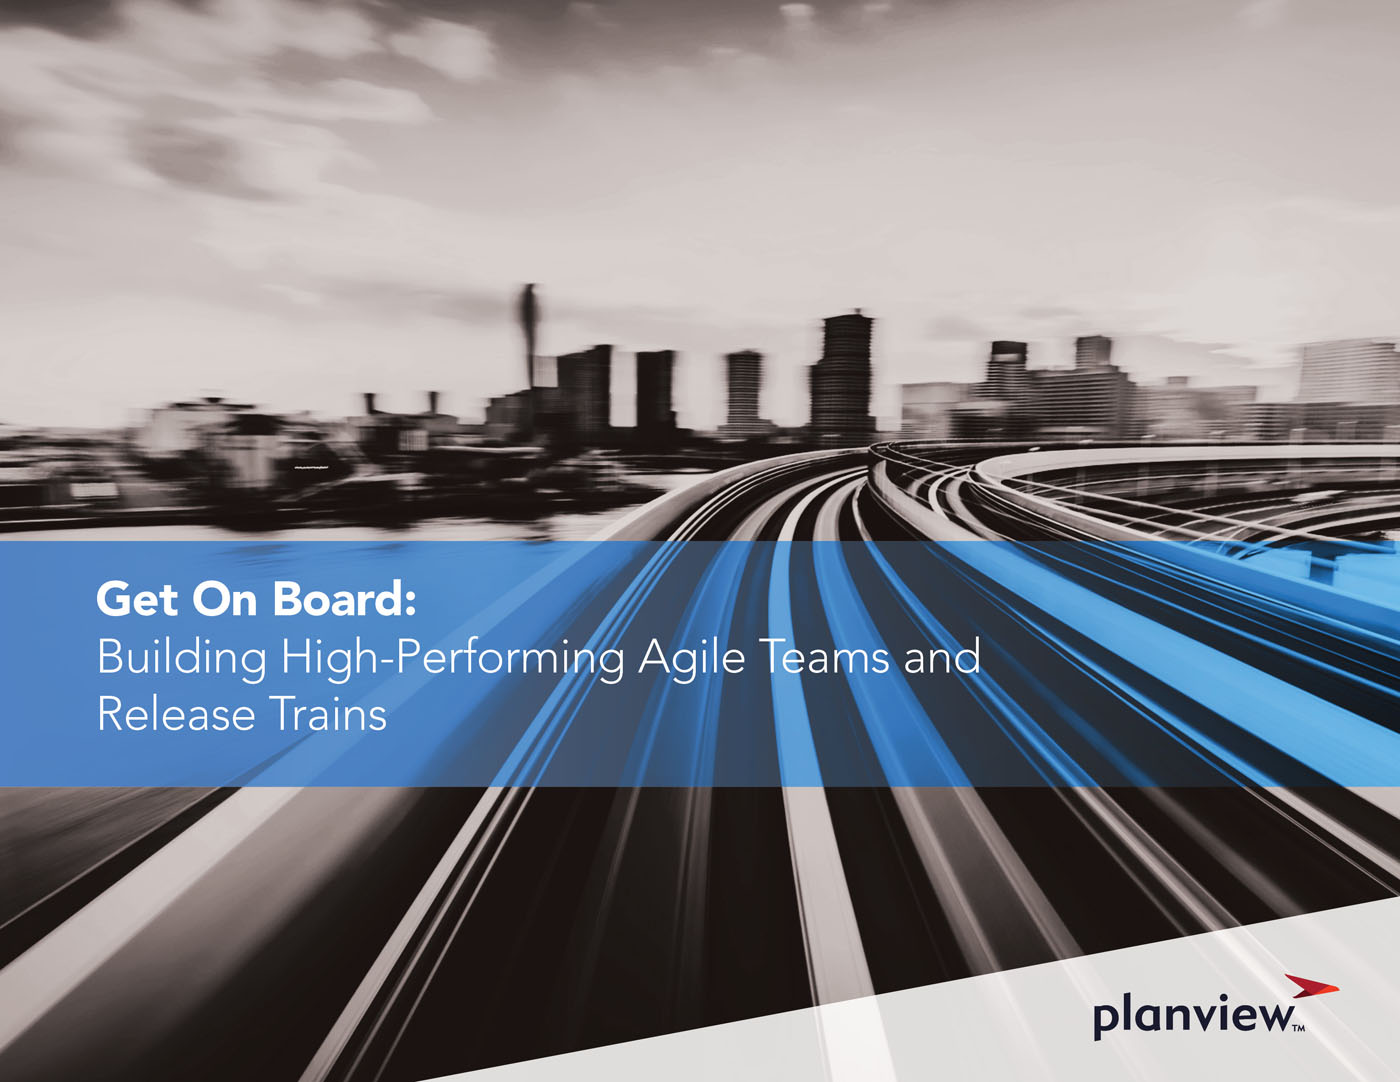 Get On Board: Building High-Performing Agile Teams and Release Trains